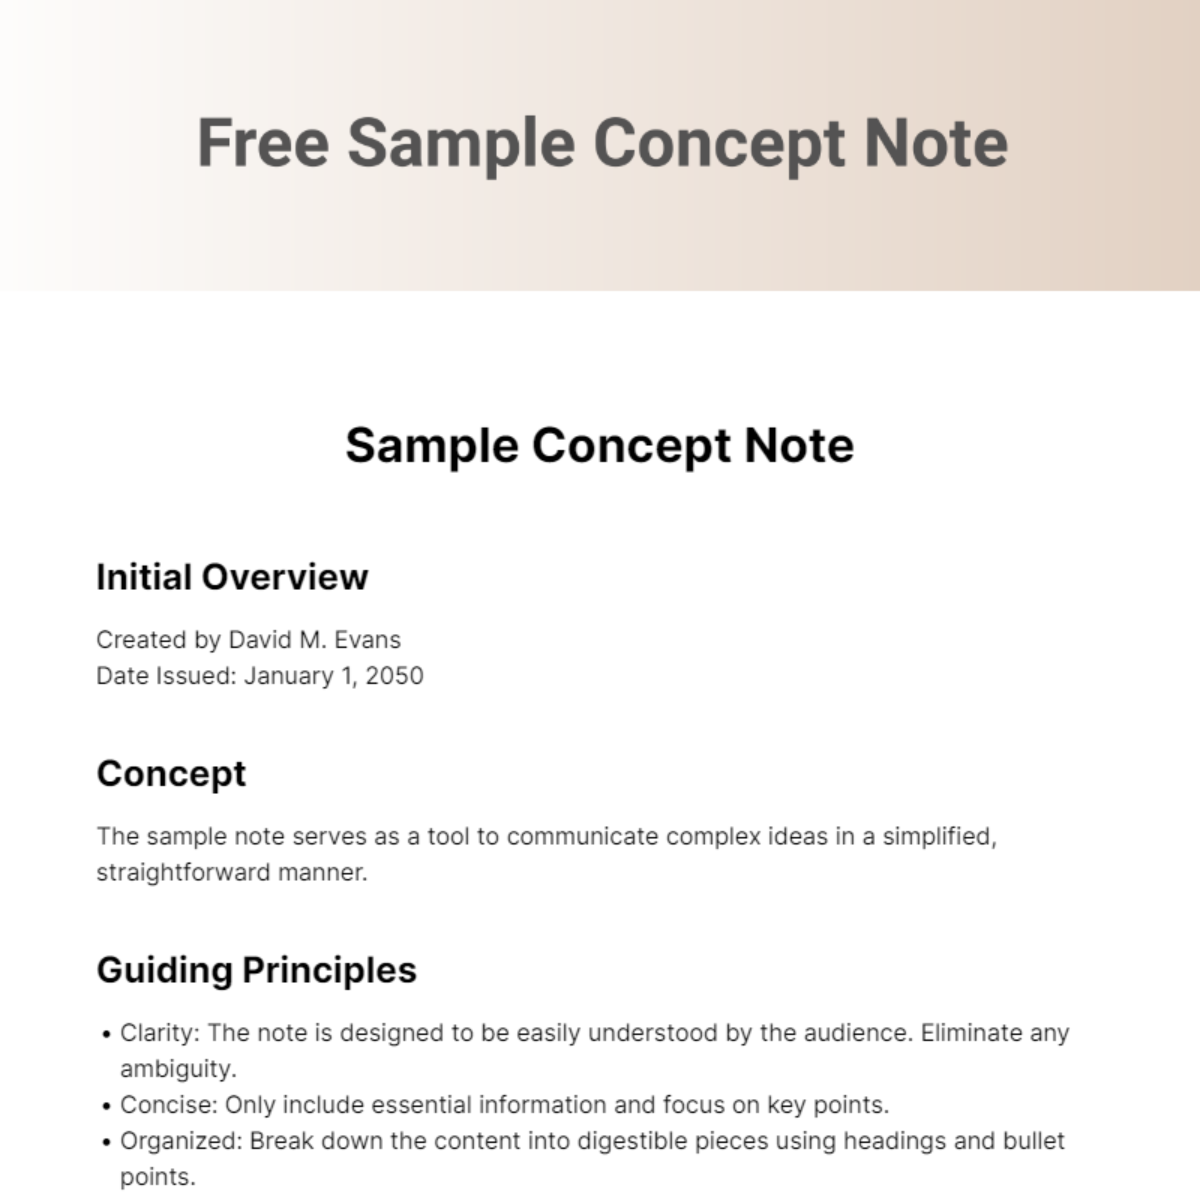 Sample Concept Note Template